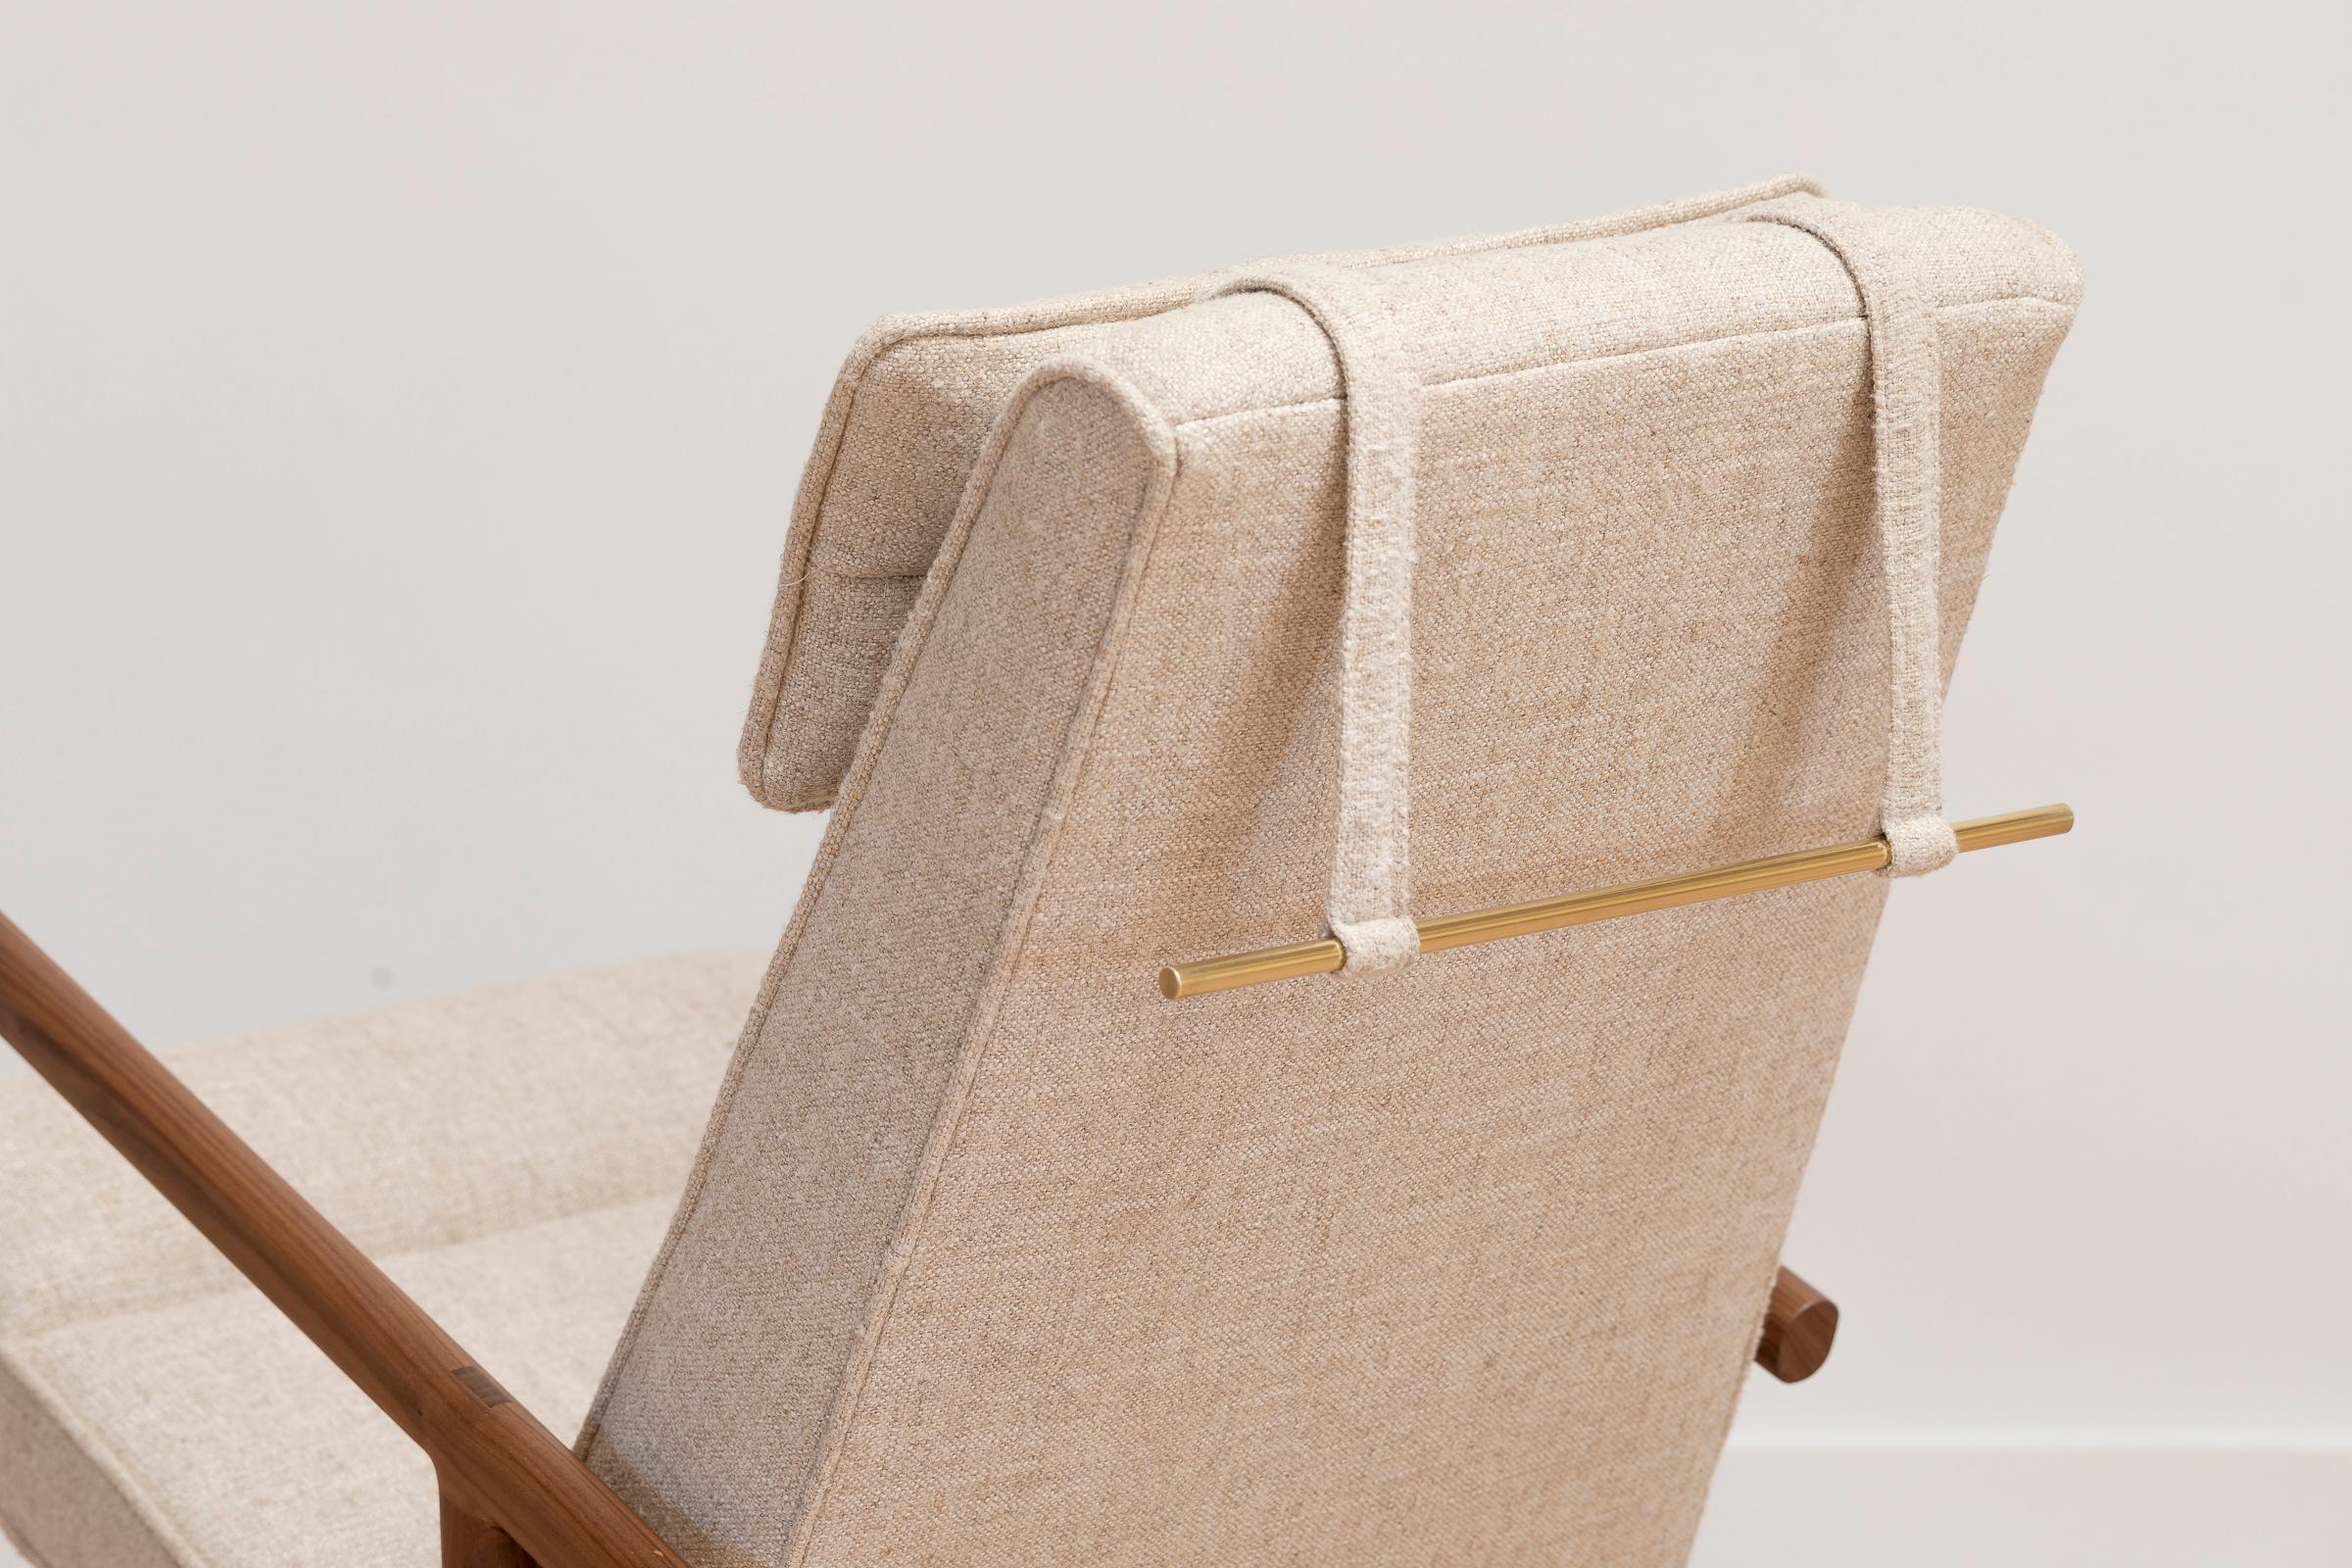 Solid wood construction with hand-cut joinery and custom upholstered seat and seat back. This Rocker shown in walnut and maharam plume ciabatta ivory textured linen.

In stock leather choice: black, olive, camel or vegtan leather.
Wood choice: